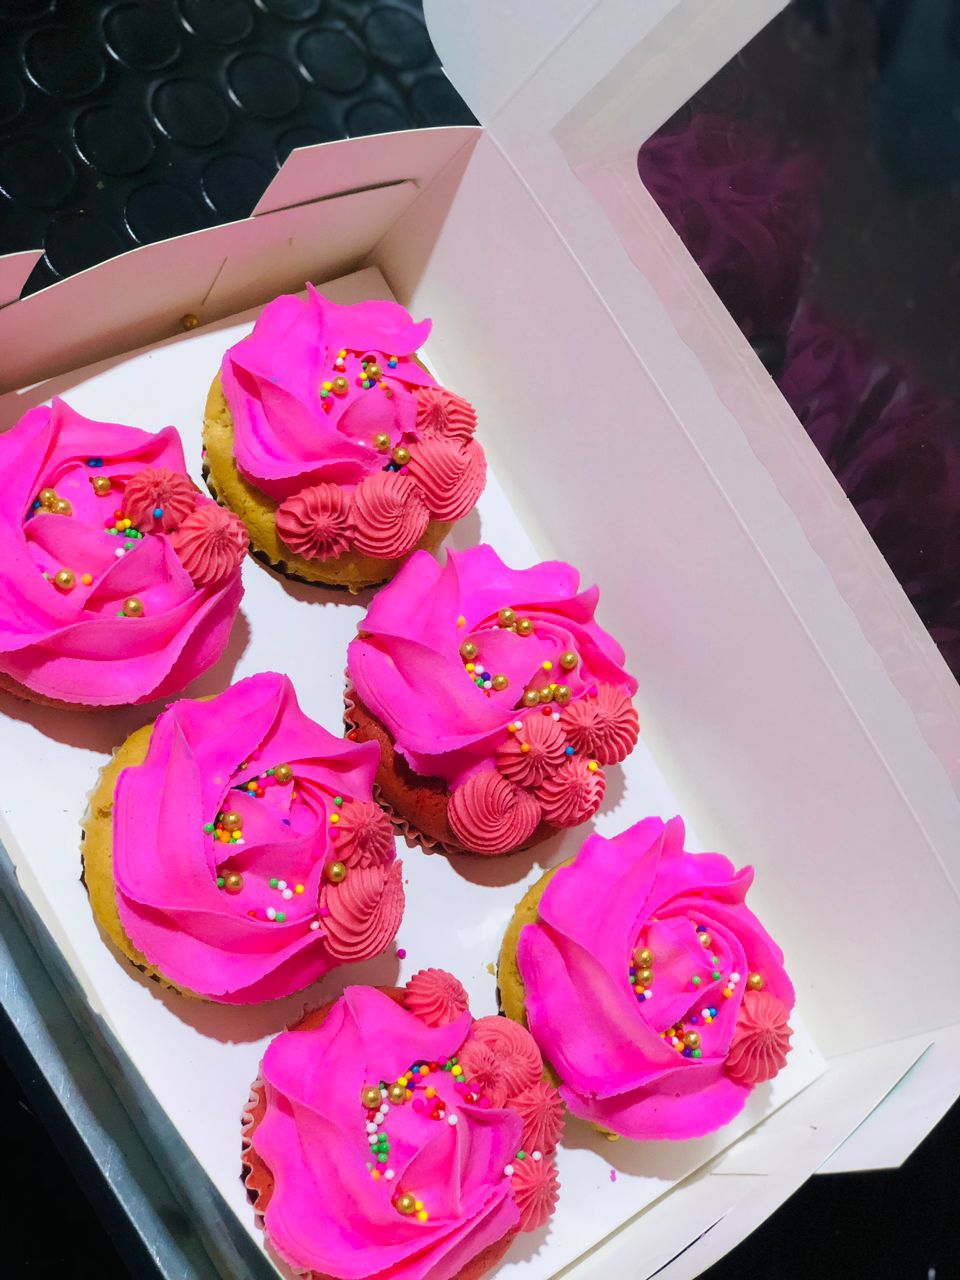 PINK YUMMY CUPCAKES...